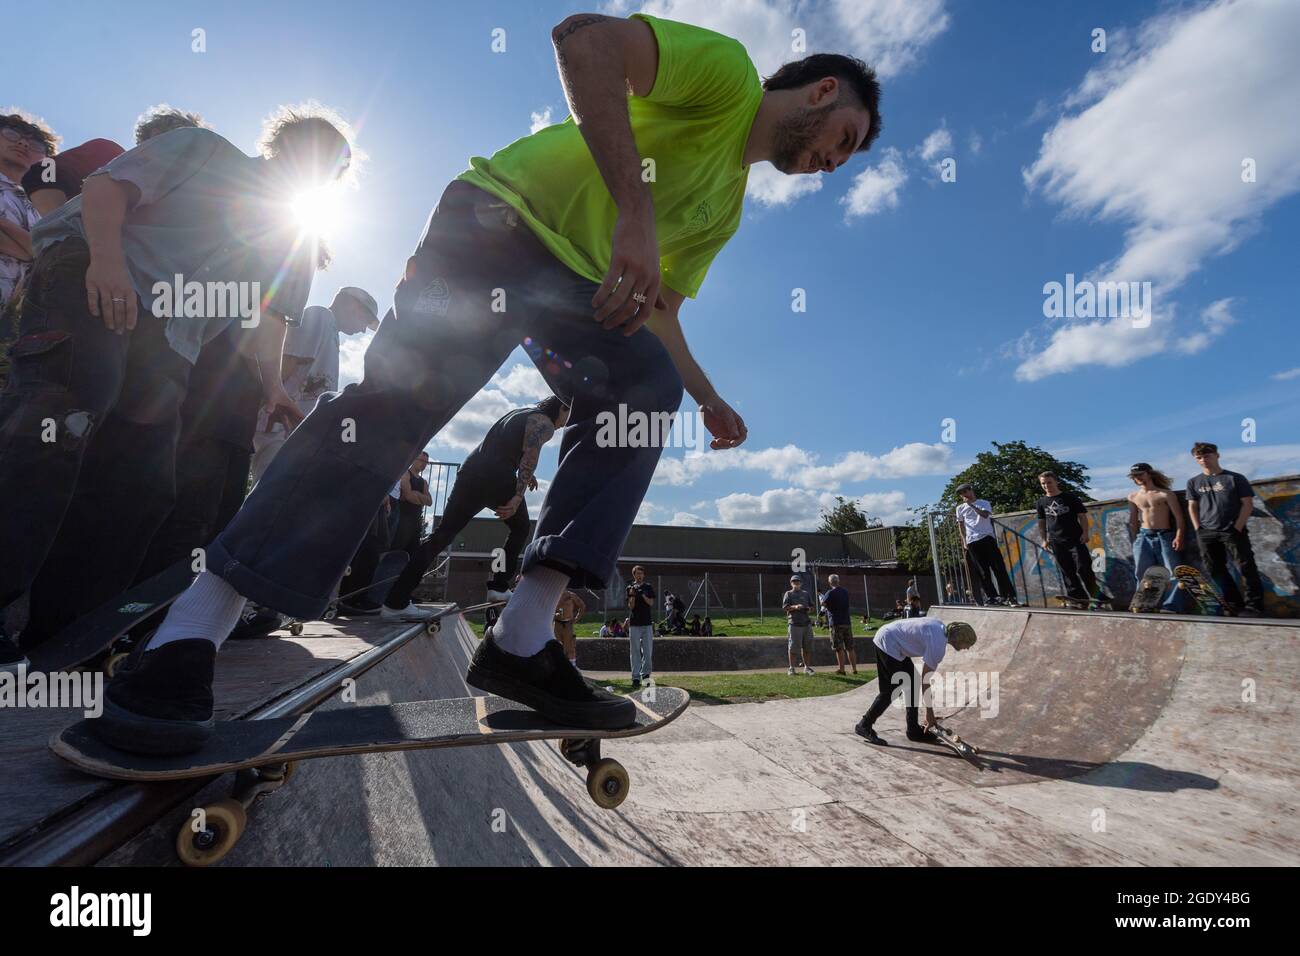 14/08/2021. London, UK. Skateboarders take part in the Harrow Skate Park  Jam event. The concrete skate park, a. k. a Solid Surf, was built and  opened on 15th July 1978. It is